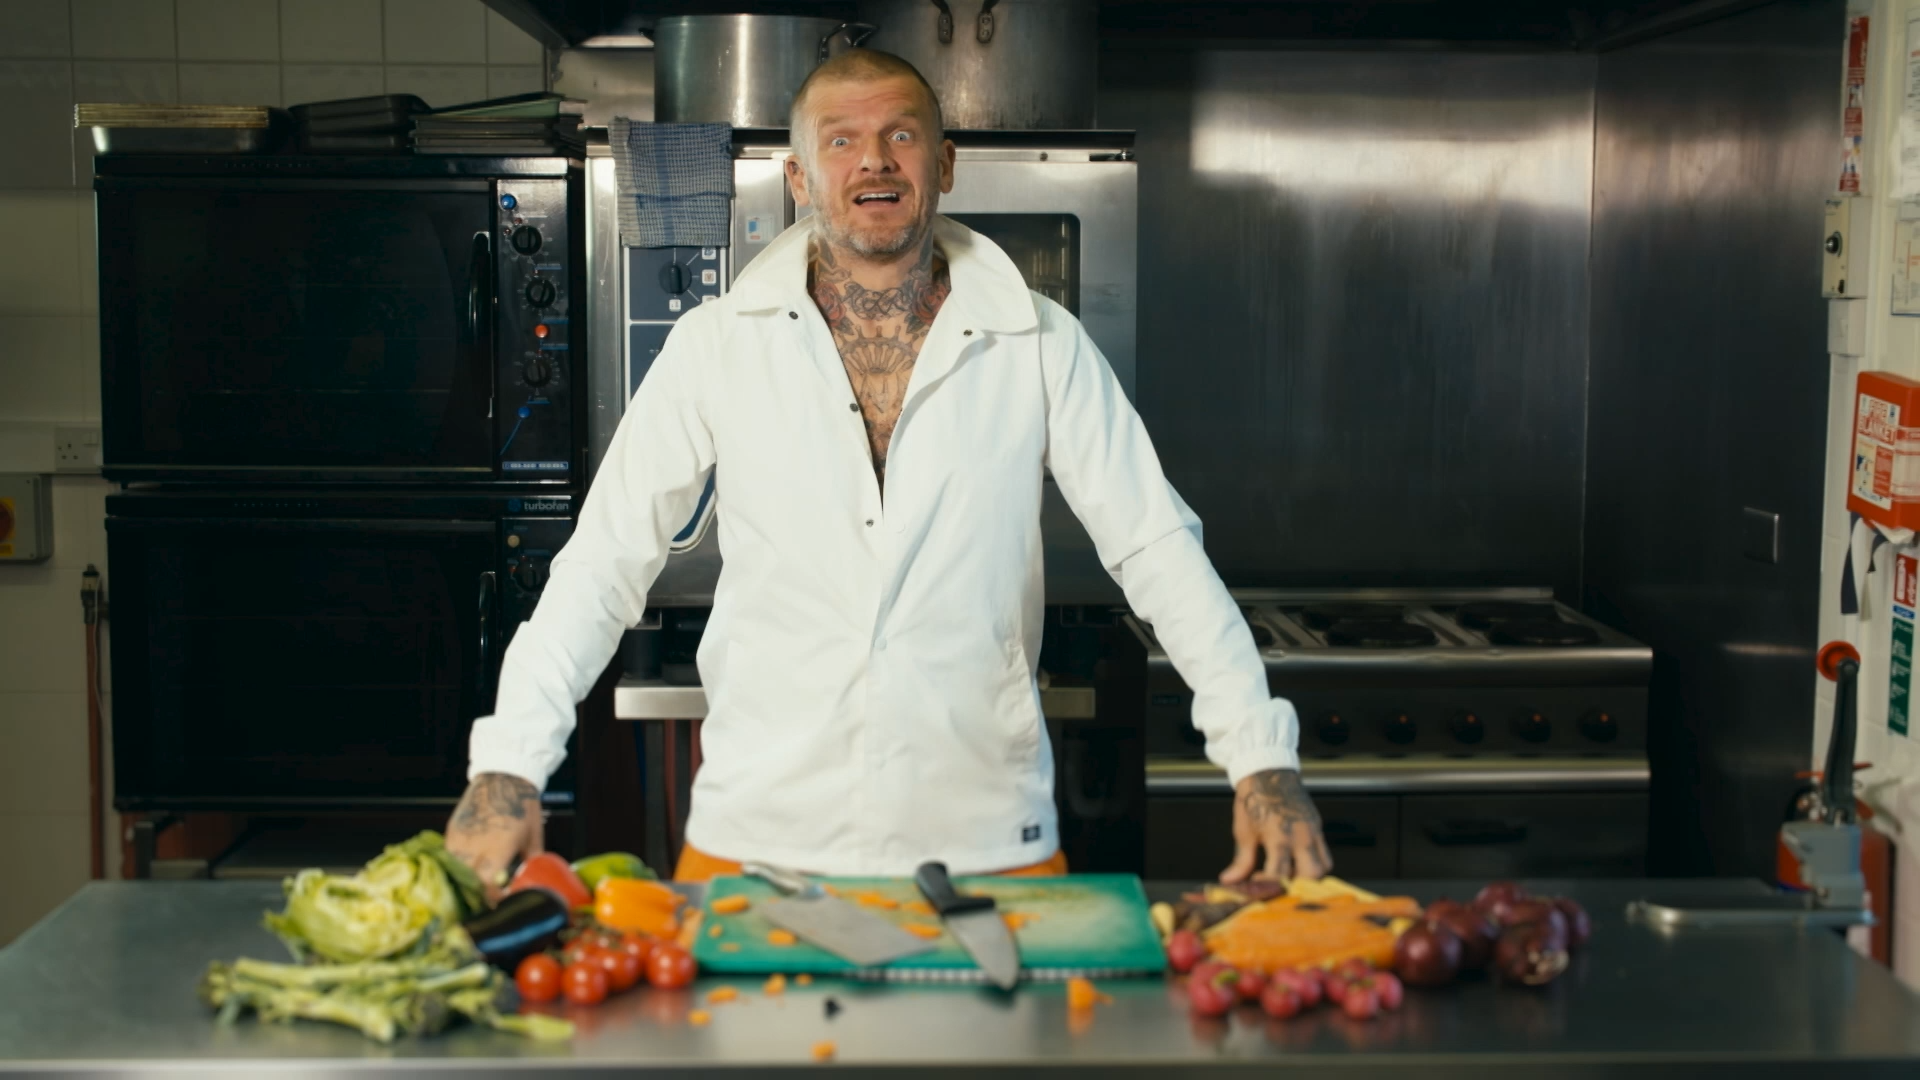 Matt Pritchard in chef whites revealing lots of tattoos standing behind a silver kitchen work bench which is filled with vegetables a chopping board and knife. 